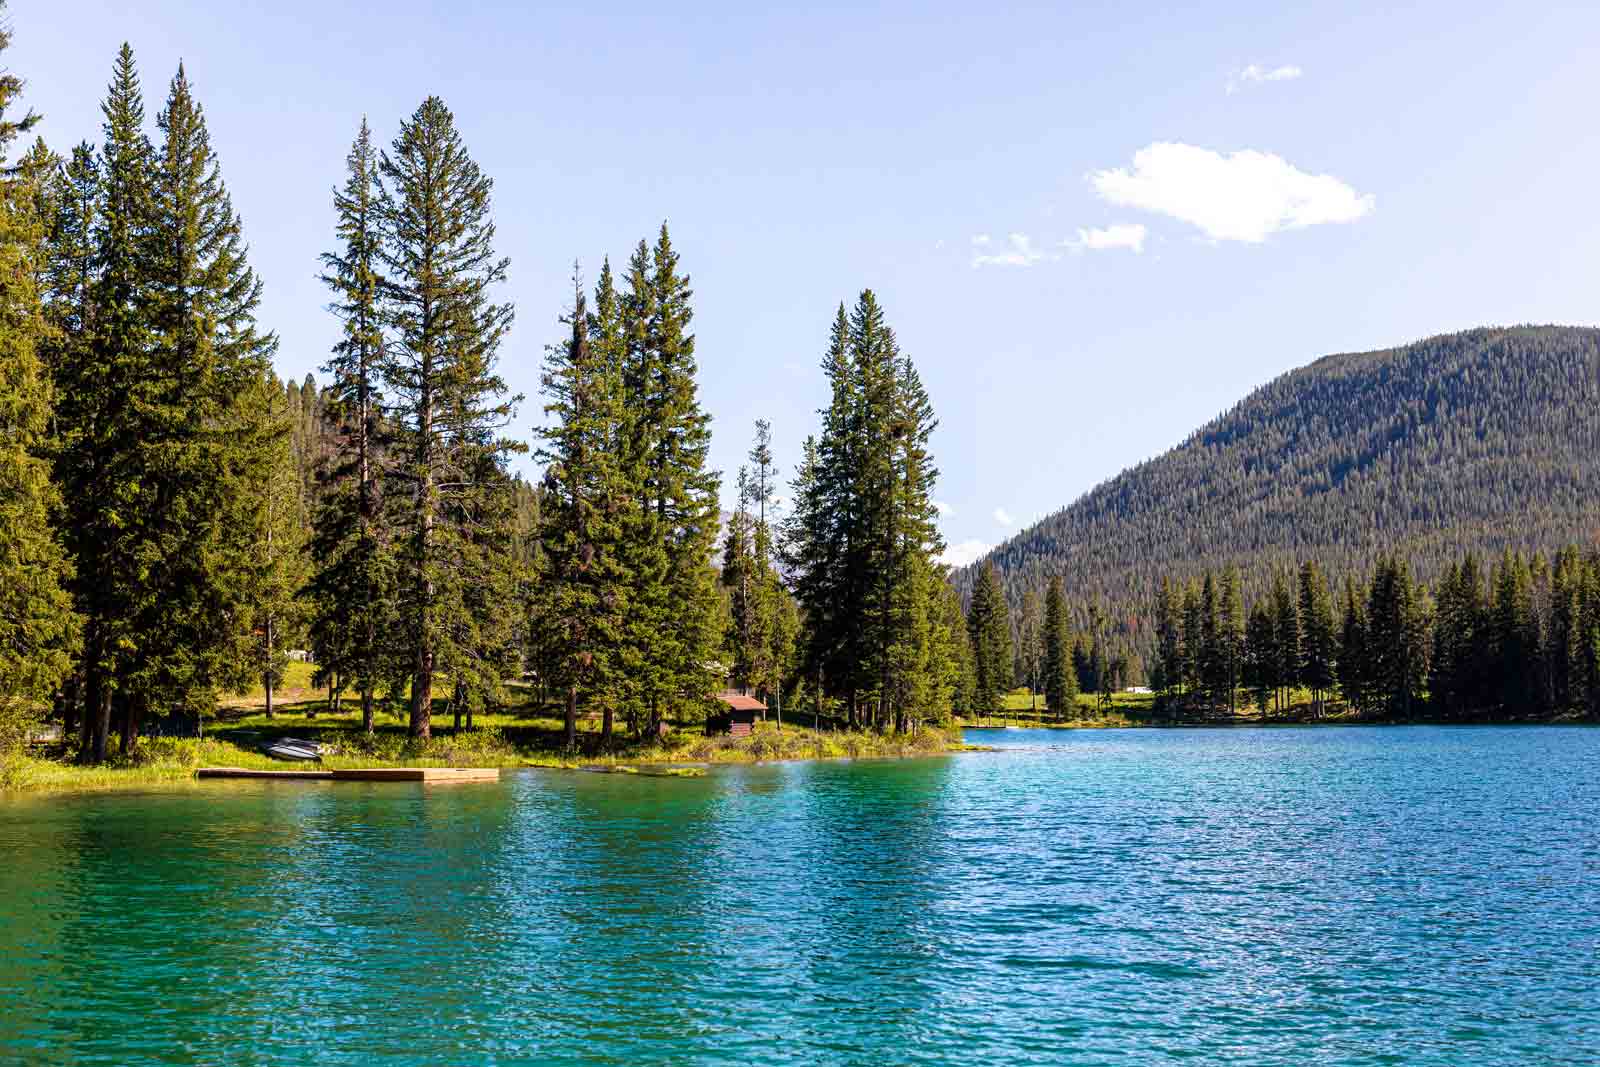 Moose Lake near Philipsburg, Montana with trees and beautiful clear blue water.